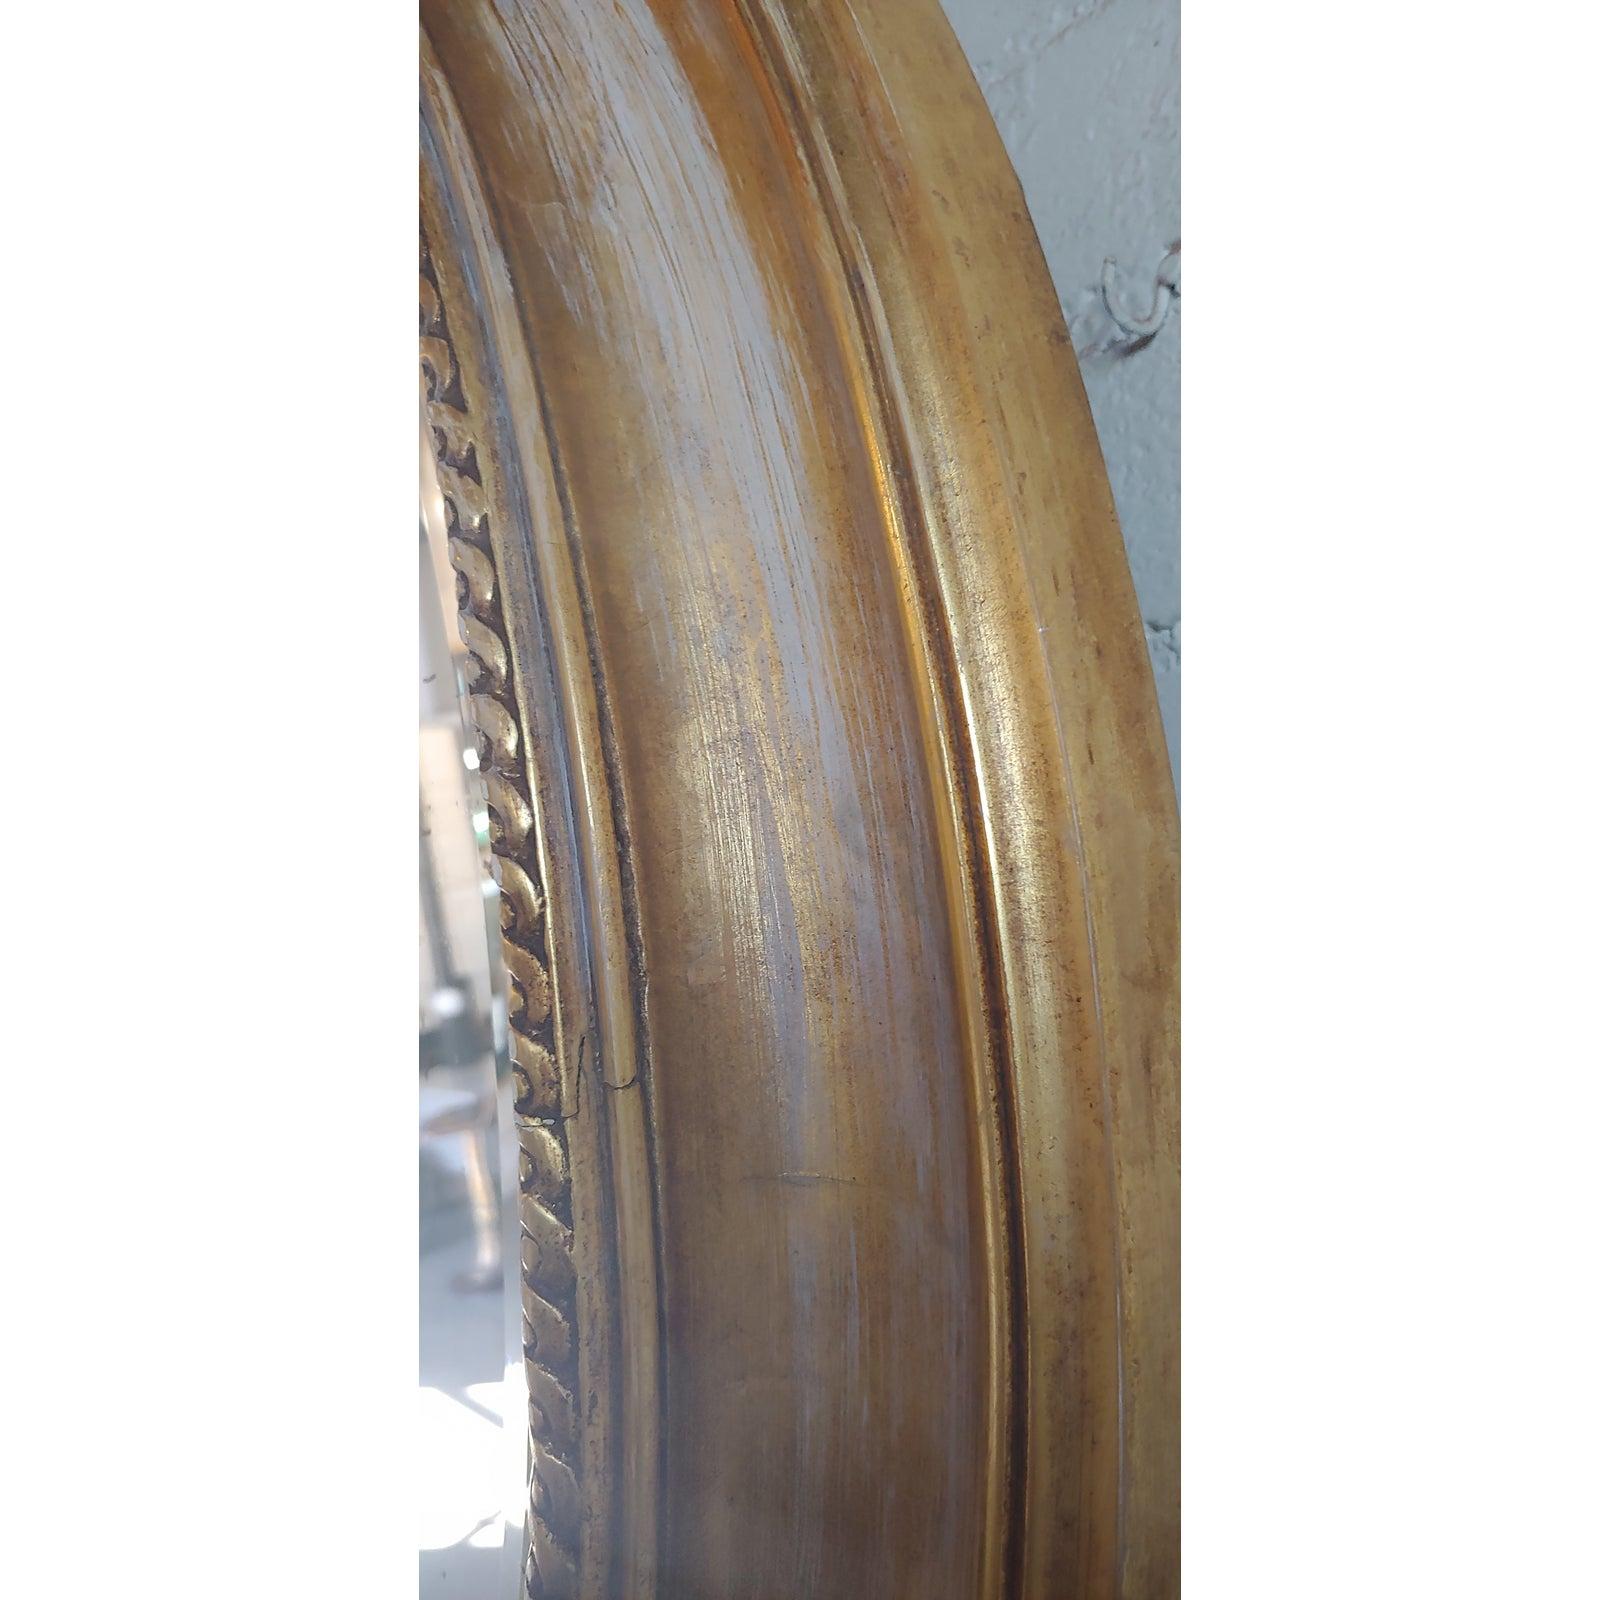 20th Century Distressed Gilt Oval Antiqued Mirror Hung by Rope For Sale